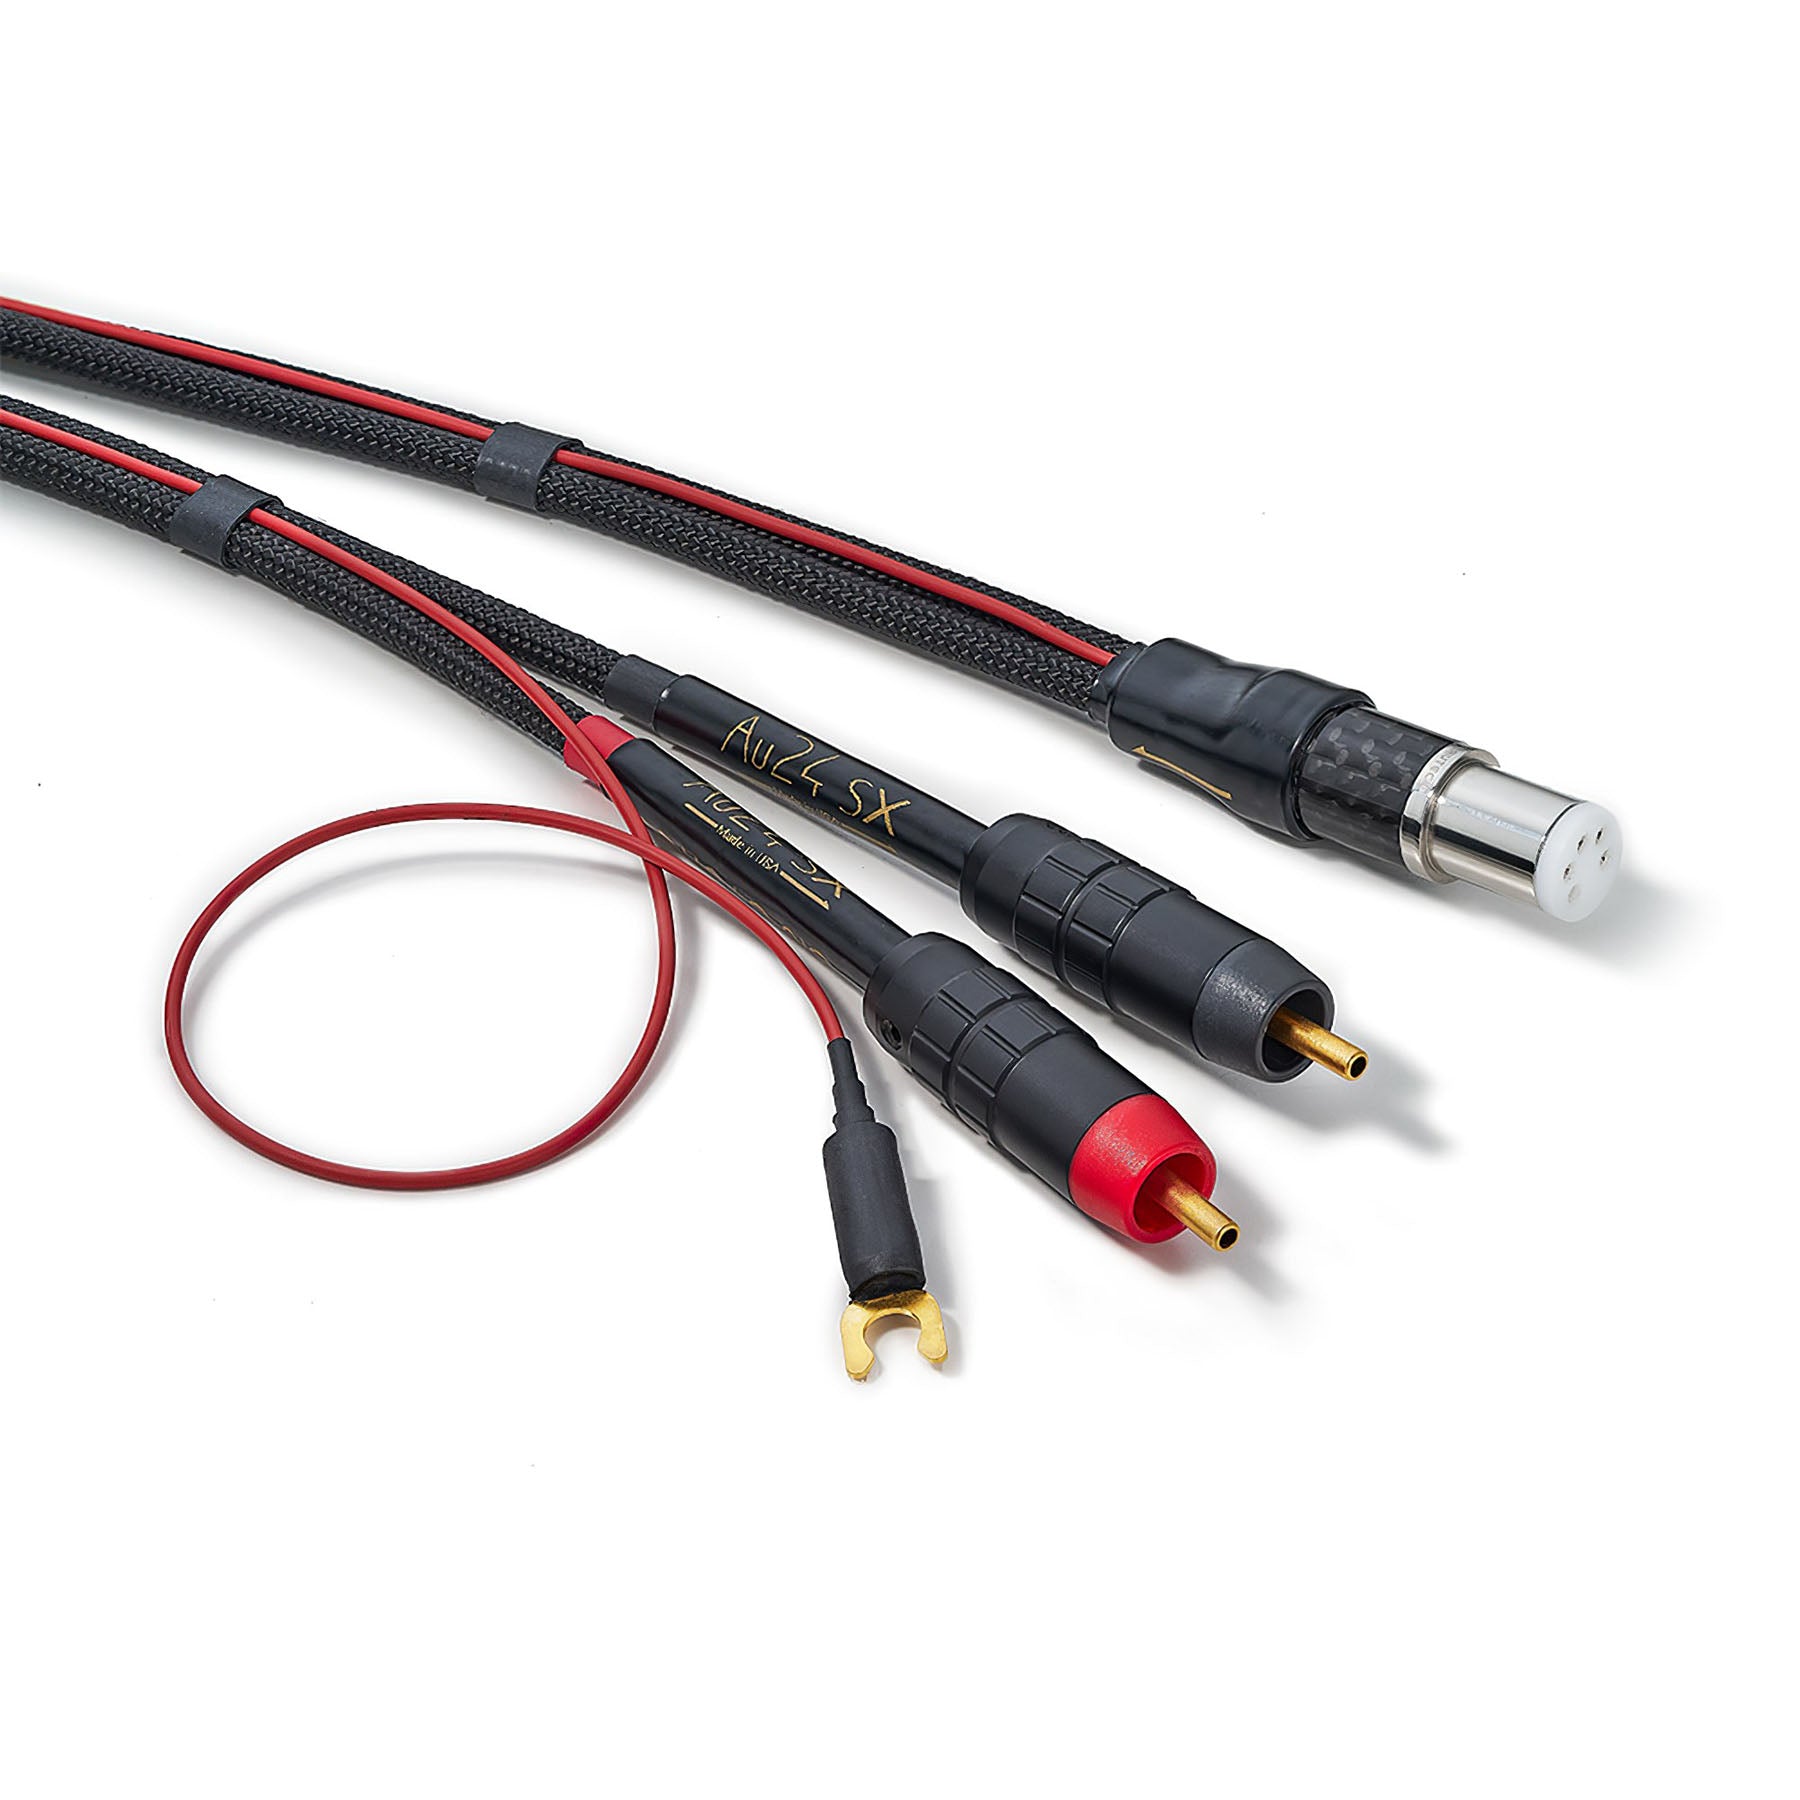 Audience Au24 SX Stereo Phono Cable